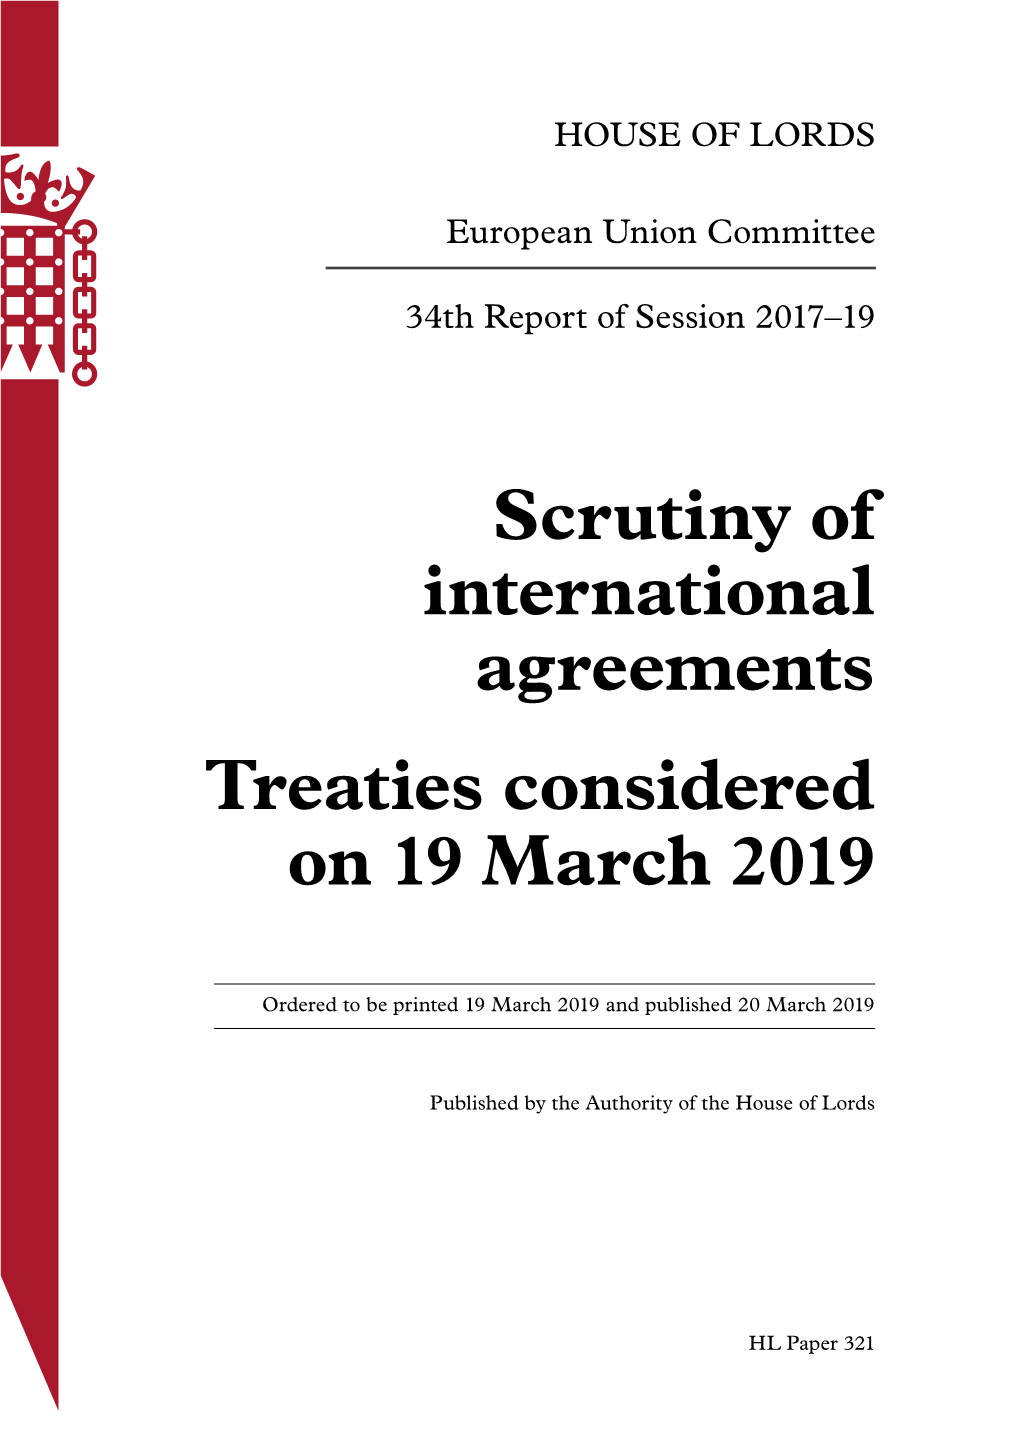 Scrutiny of International Agreements; Treaties Considered on 19 March 2019